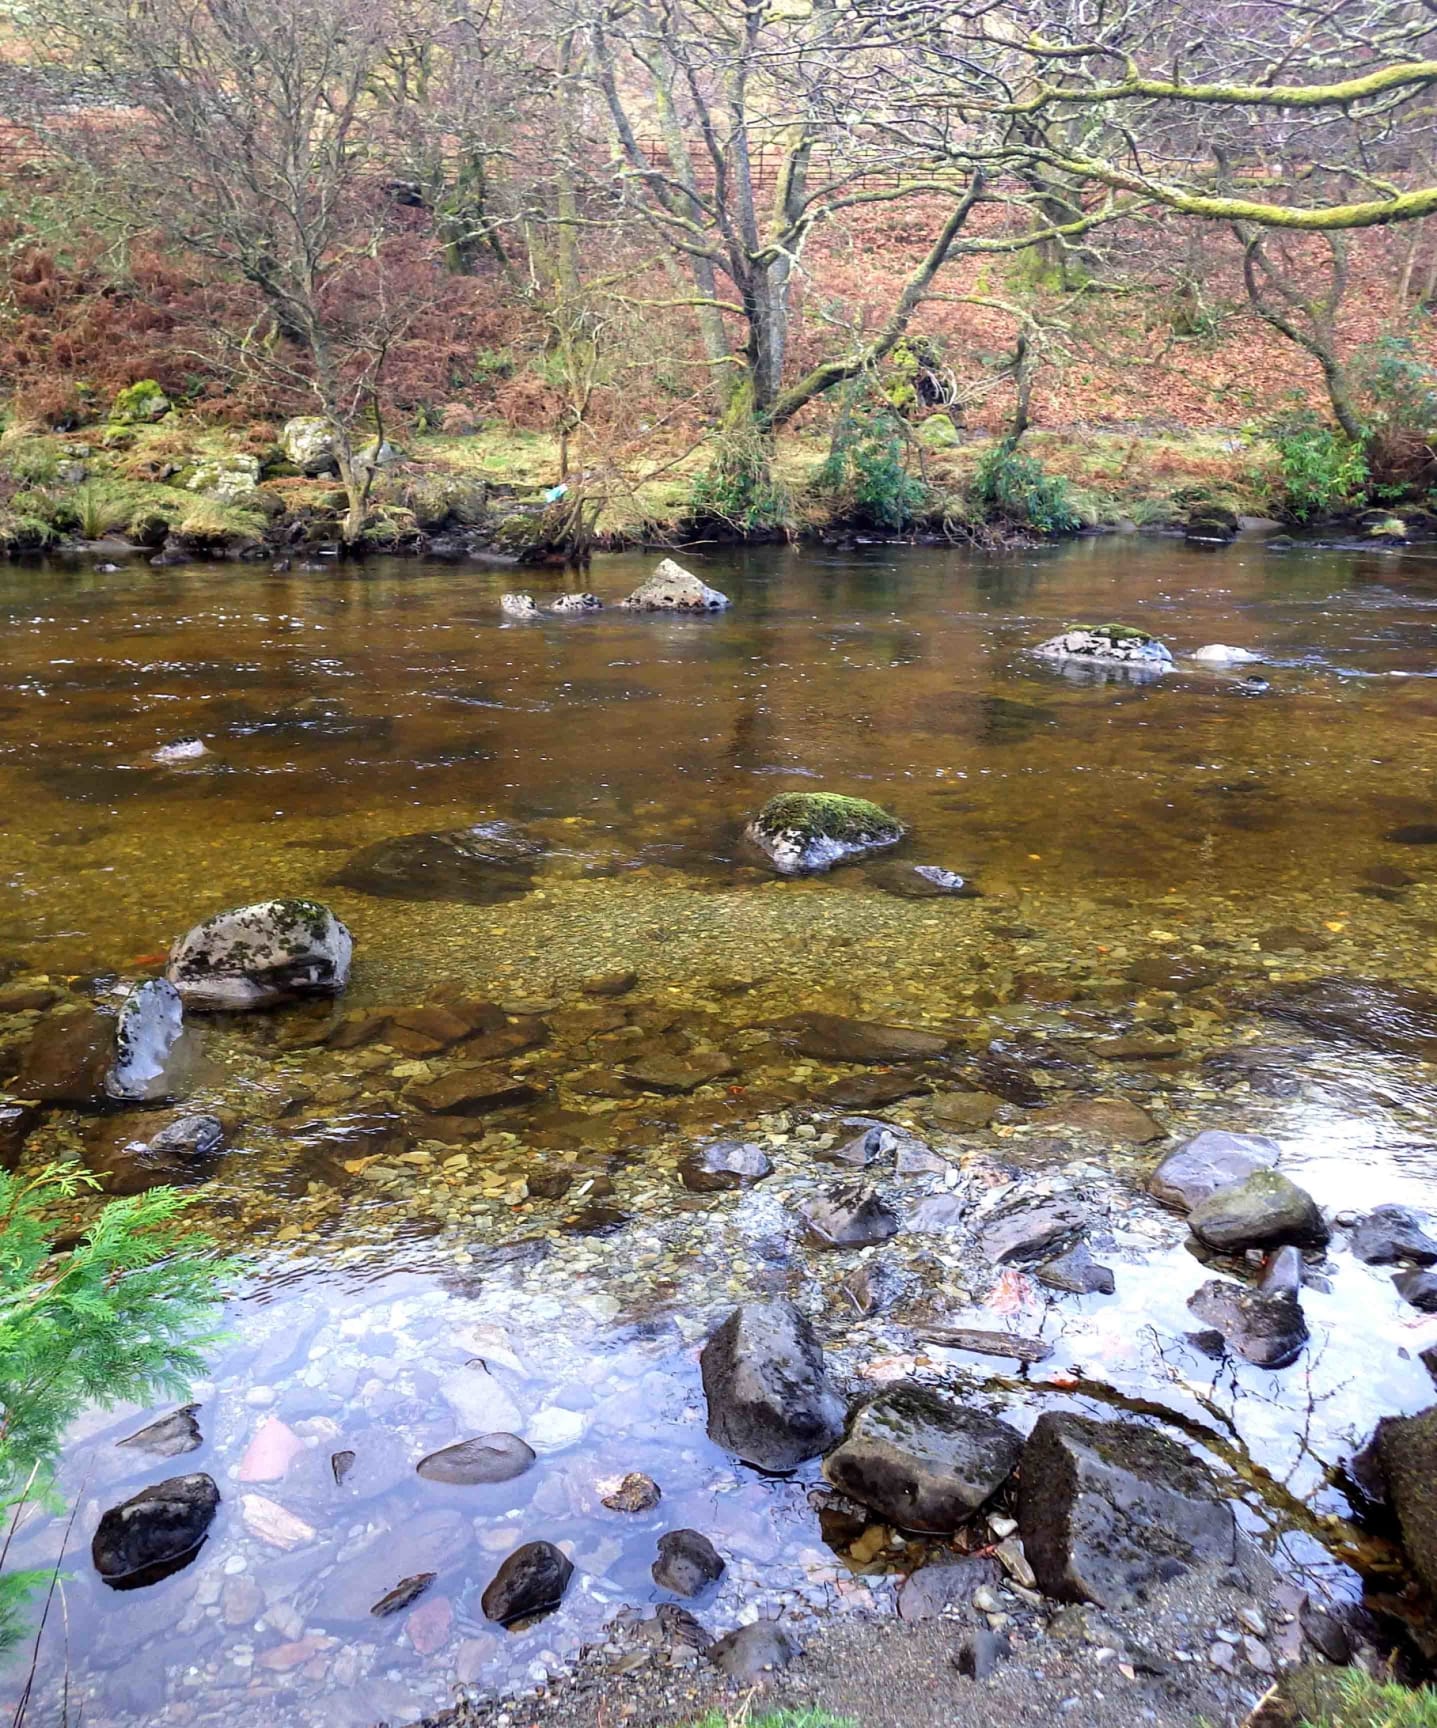 A newly formed gravel bar in the upper Elan last December. We now know that areas like this were used by both salmon and trout to spawn last winter